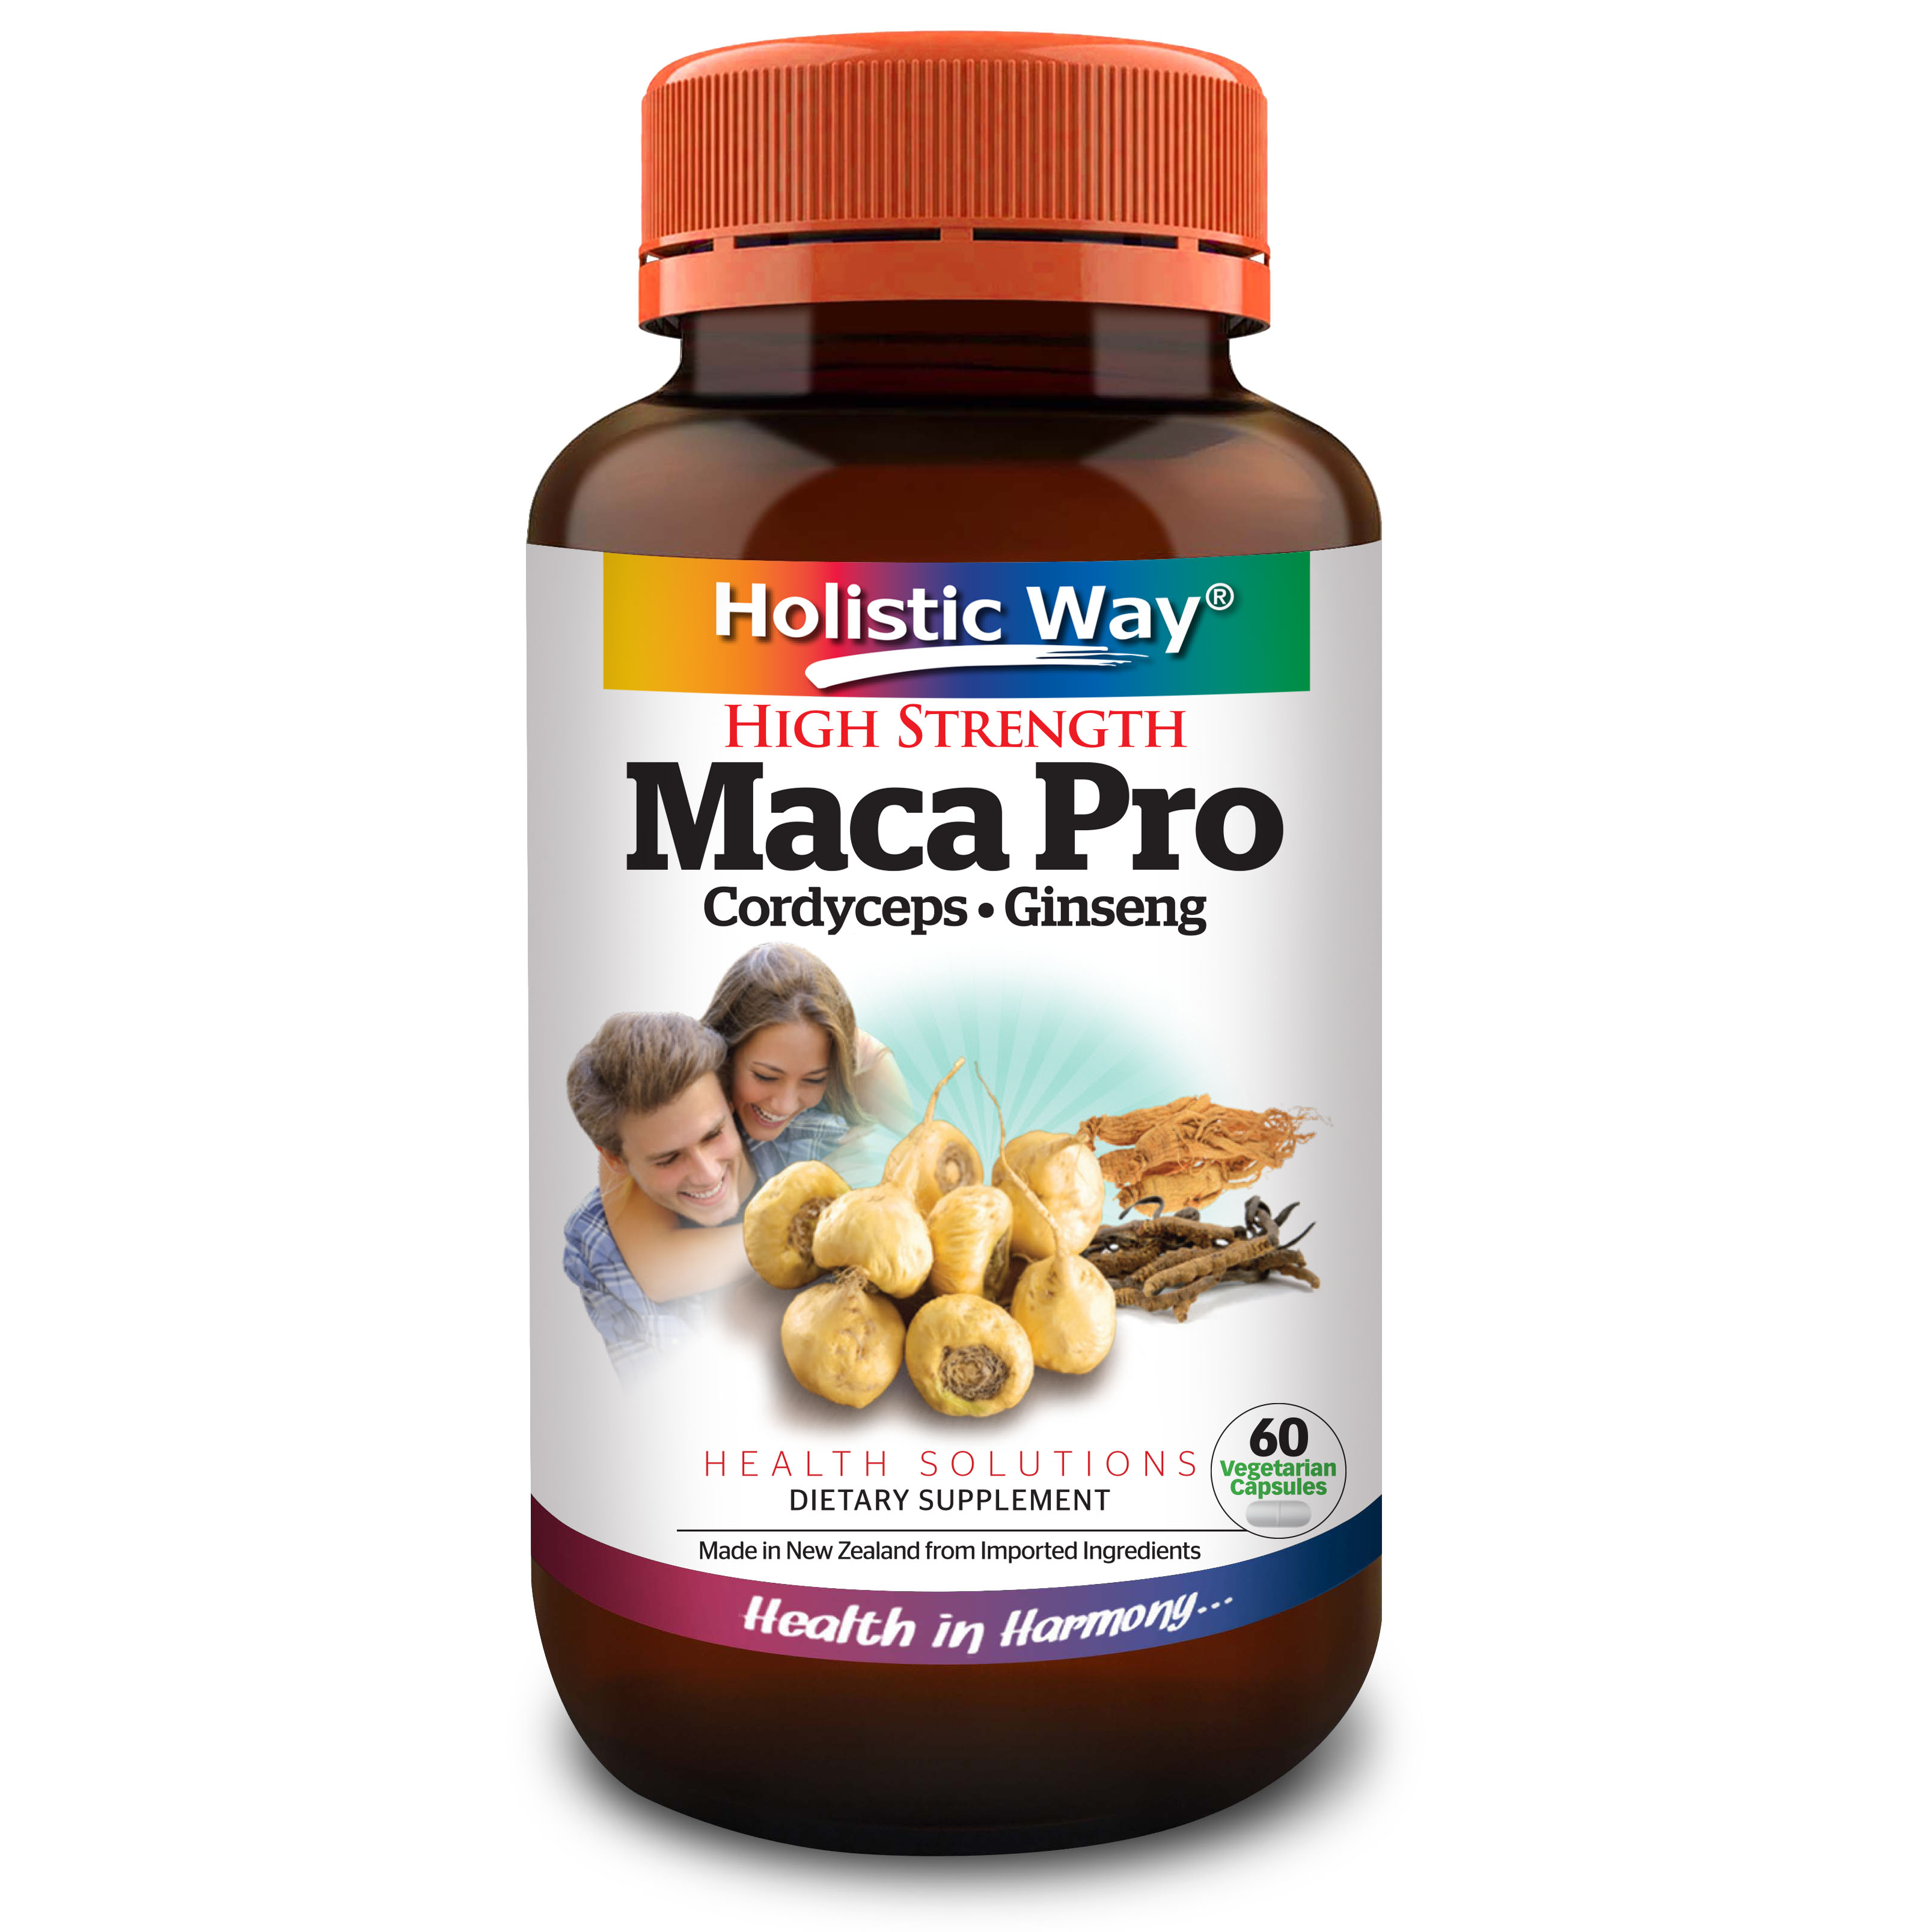 High Strength Maca Pro with Cordyceps and Ginseng (60 Vegetarian Capsules)